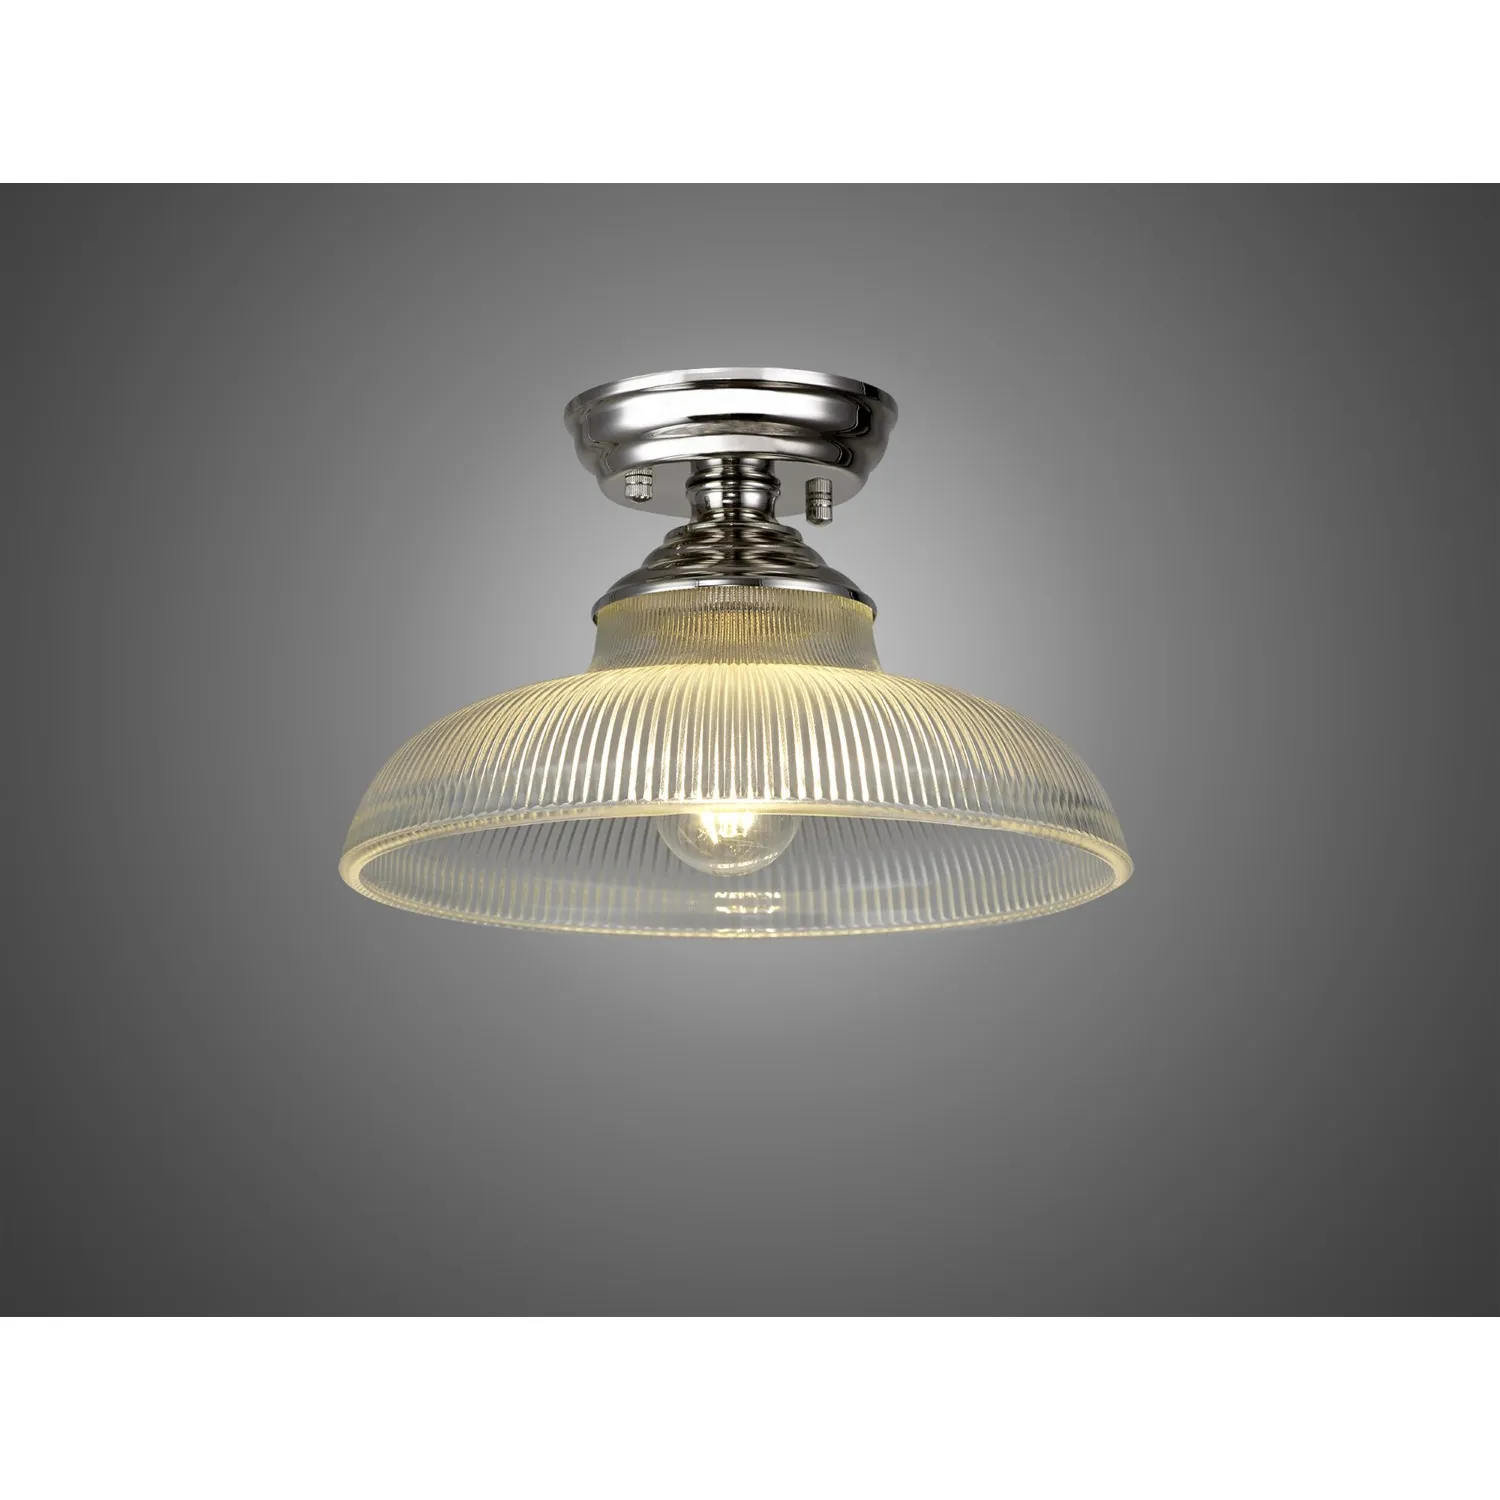 Billericay 1 Light Flush Ceiling E27 With Round 30cm Glass Shade Polished Nickel Clear